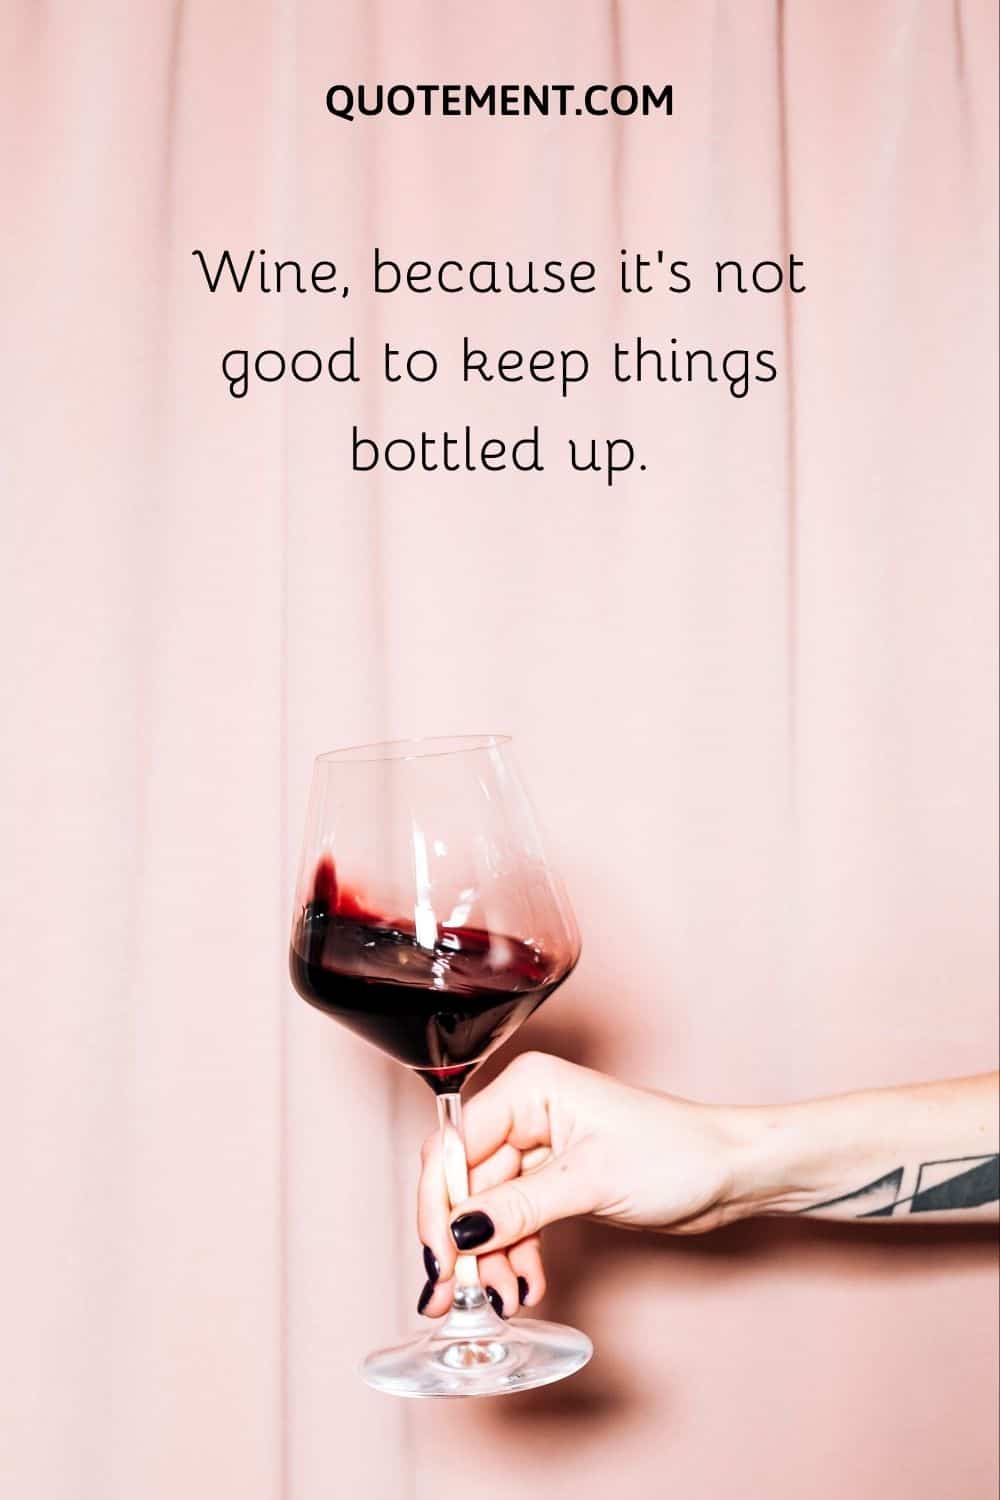 Wine, because it’s not good to keep things bottled up